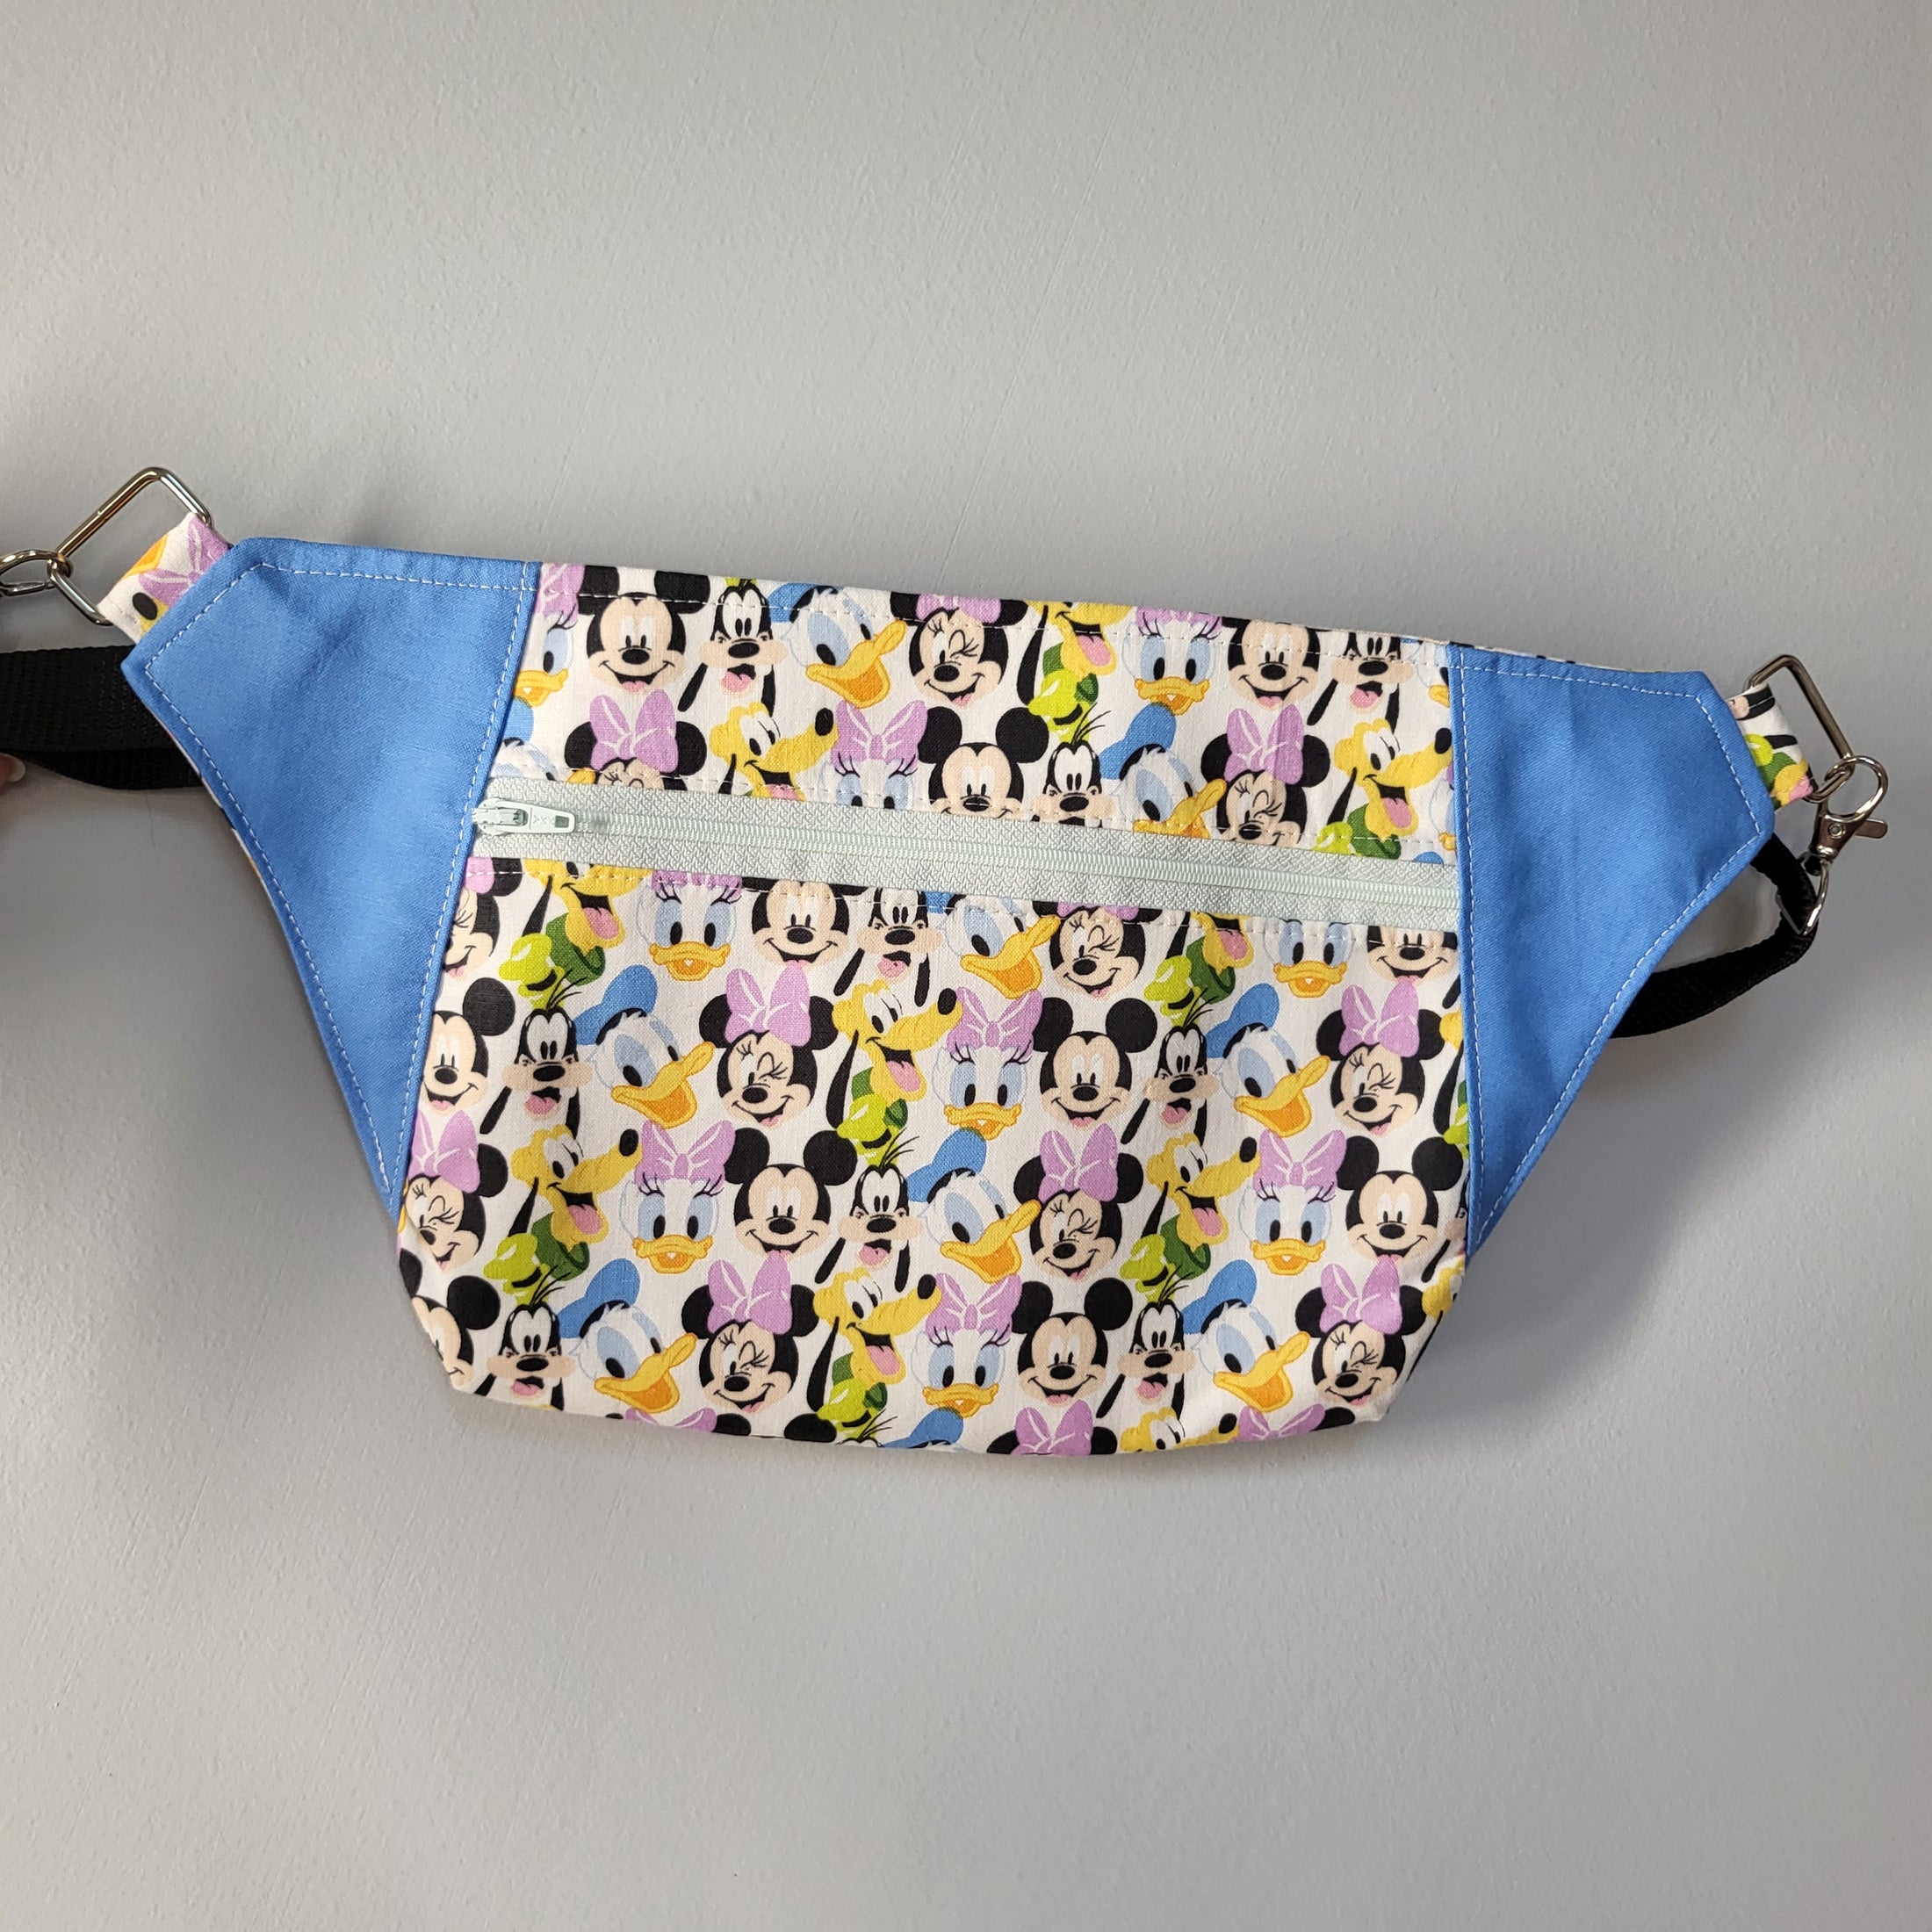 Fab Five fanny pack with adjustable strap.